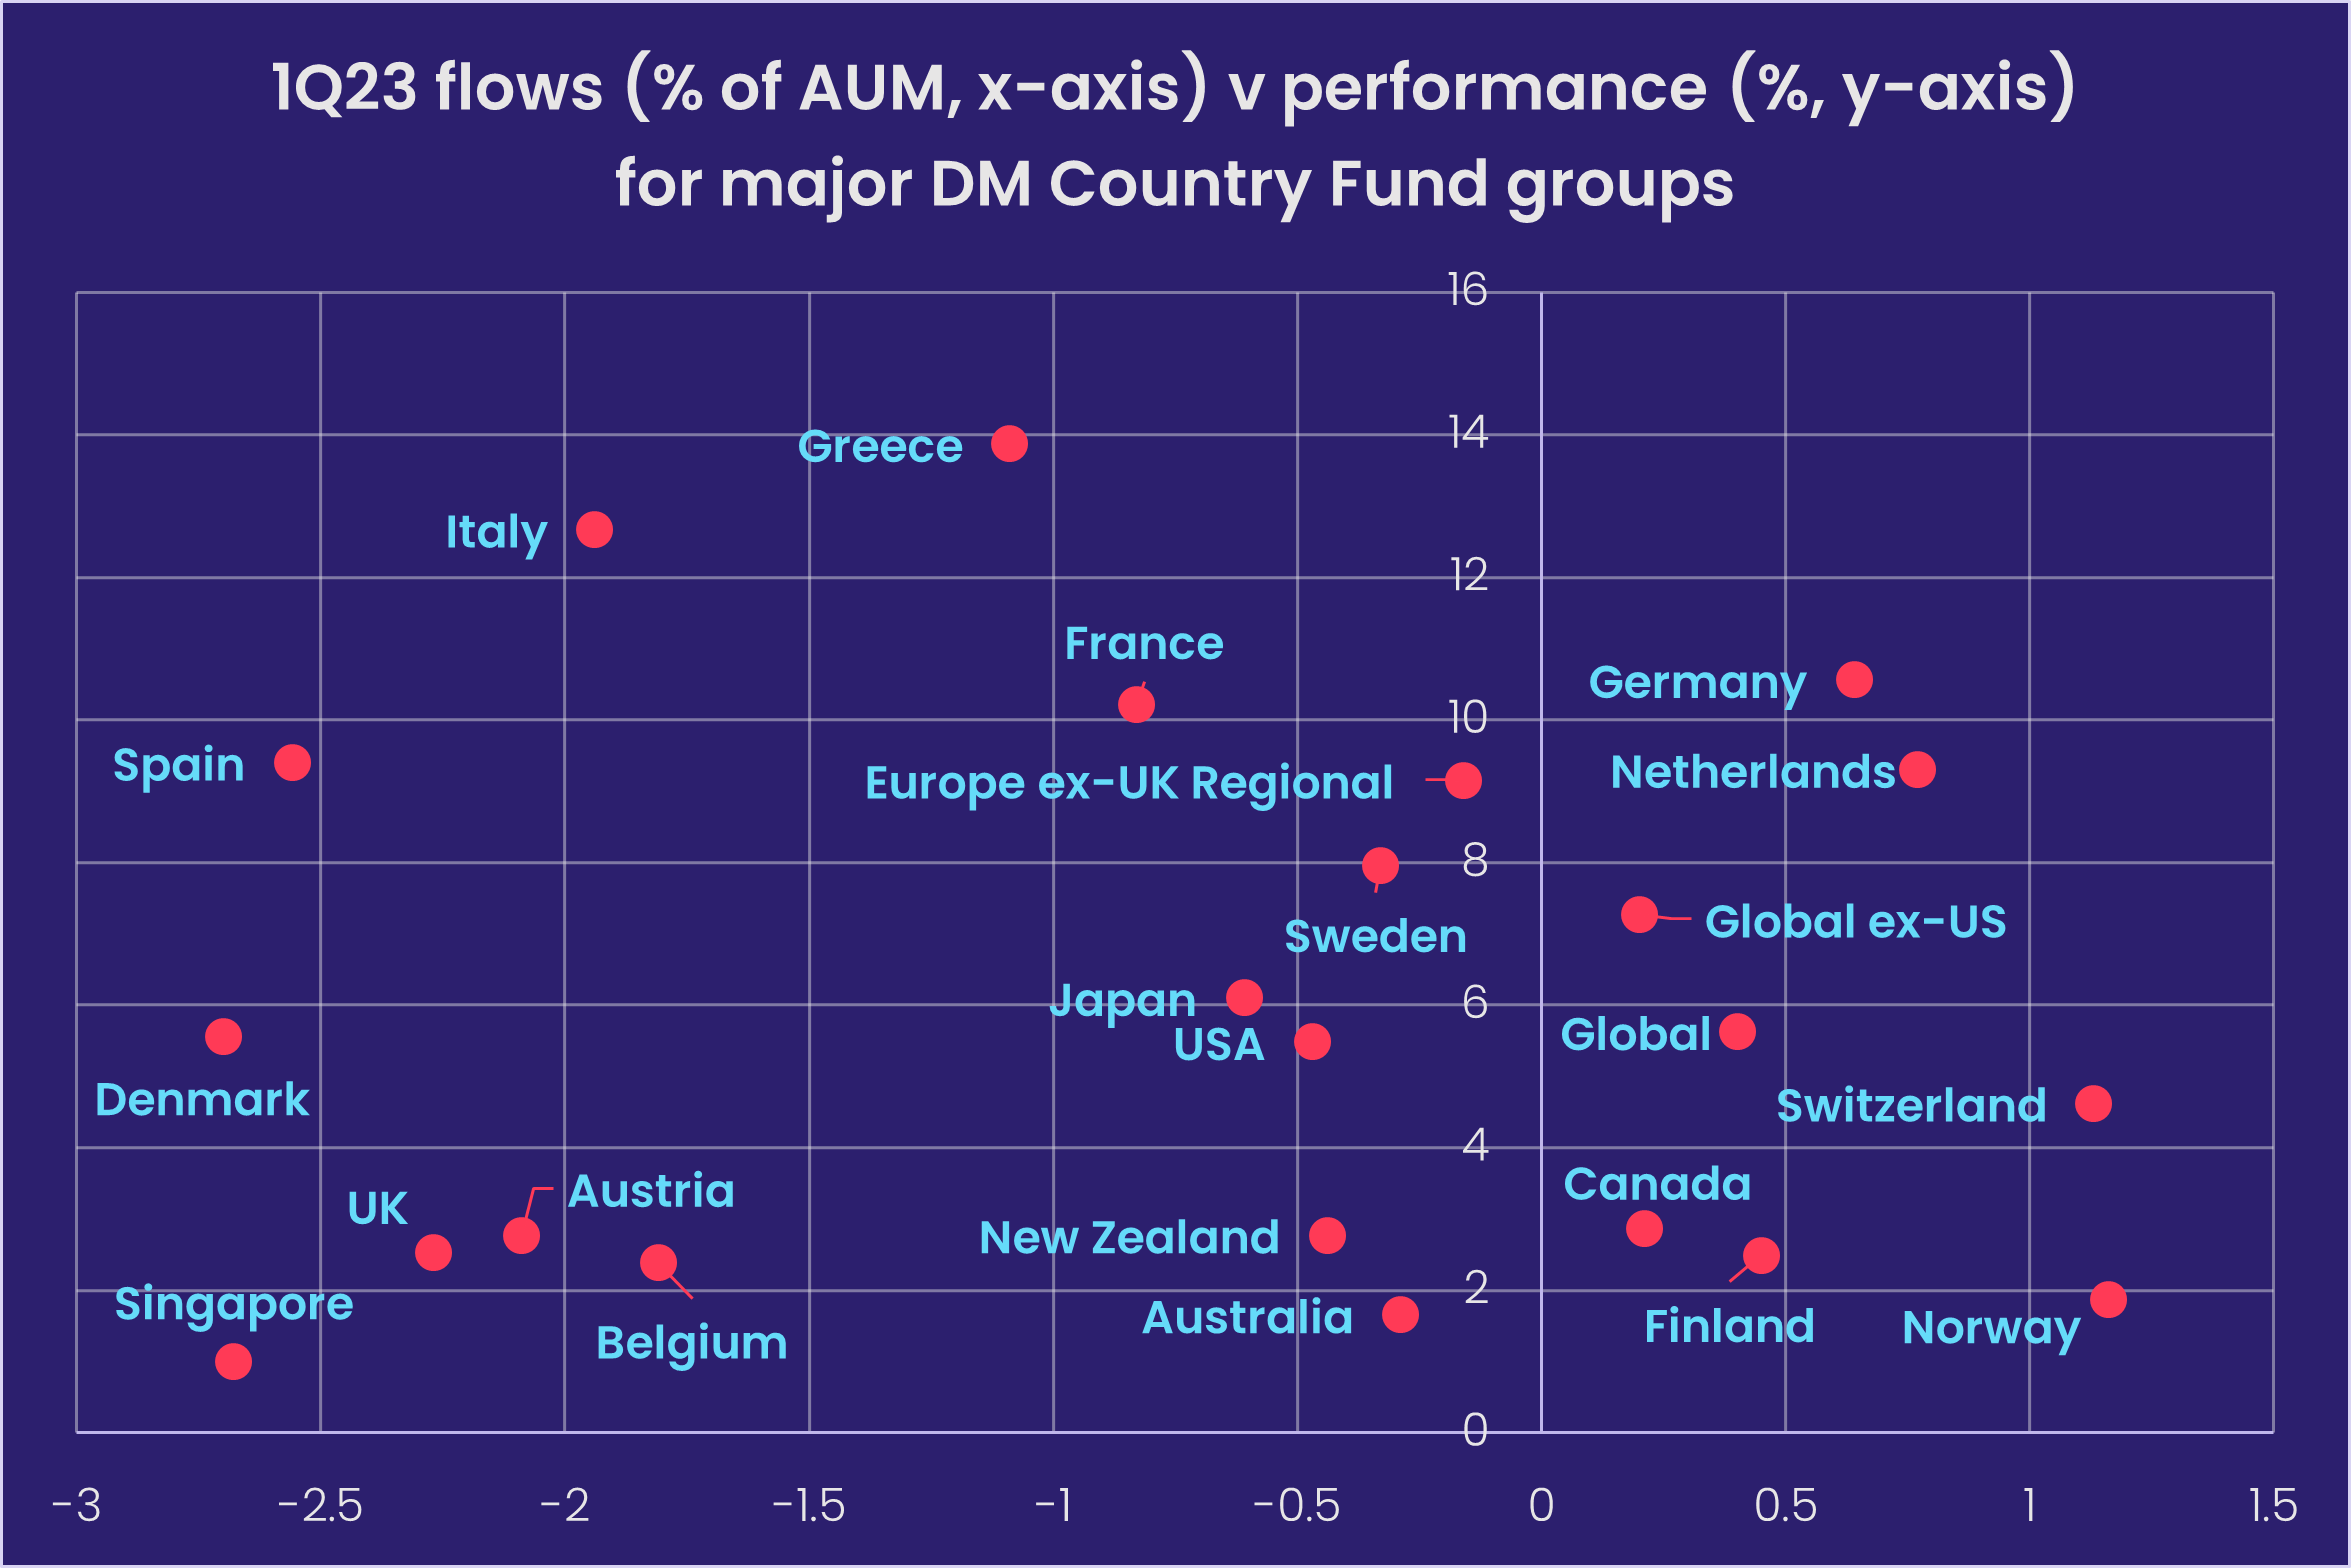 Chart representing '1Q23 flows in percentage of AUM, x-axis versus perforamce in percentage, y-axis for major DM Country Fund groups'